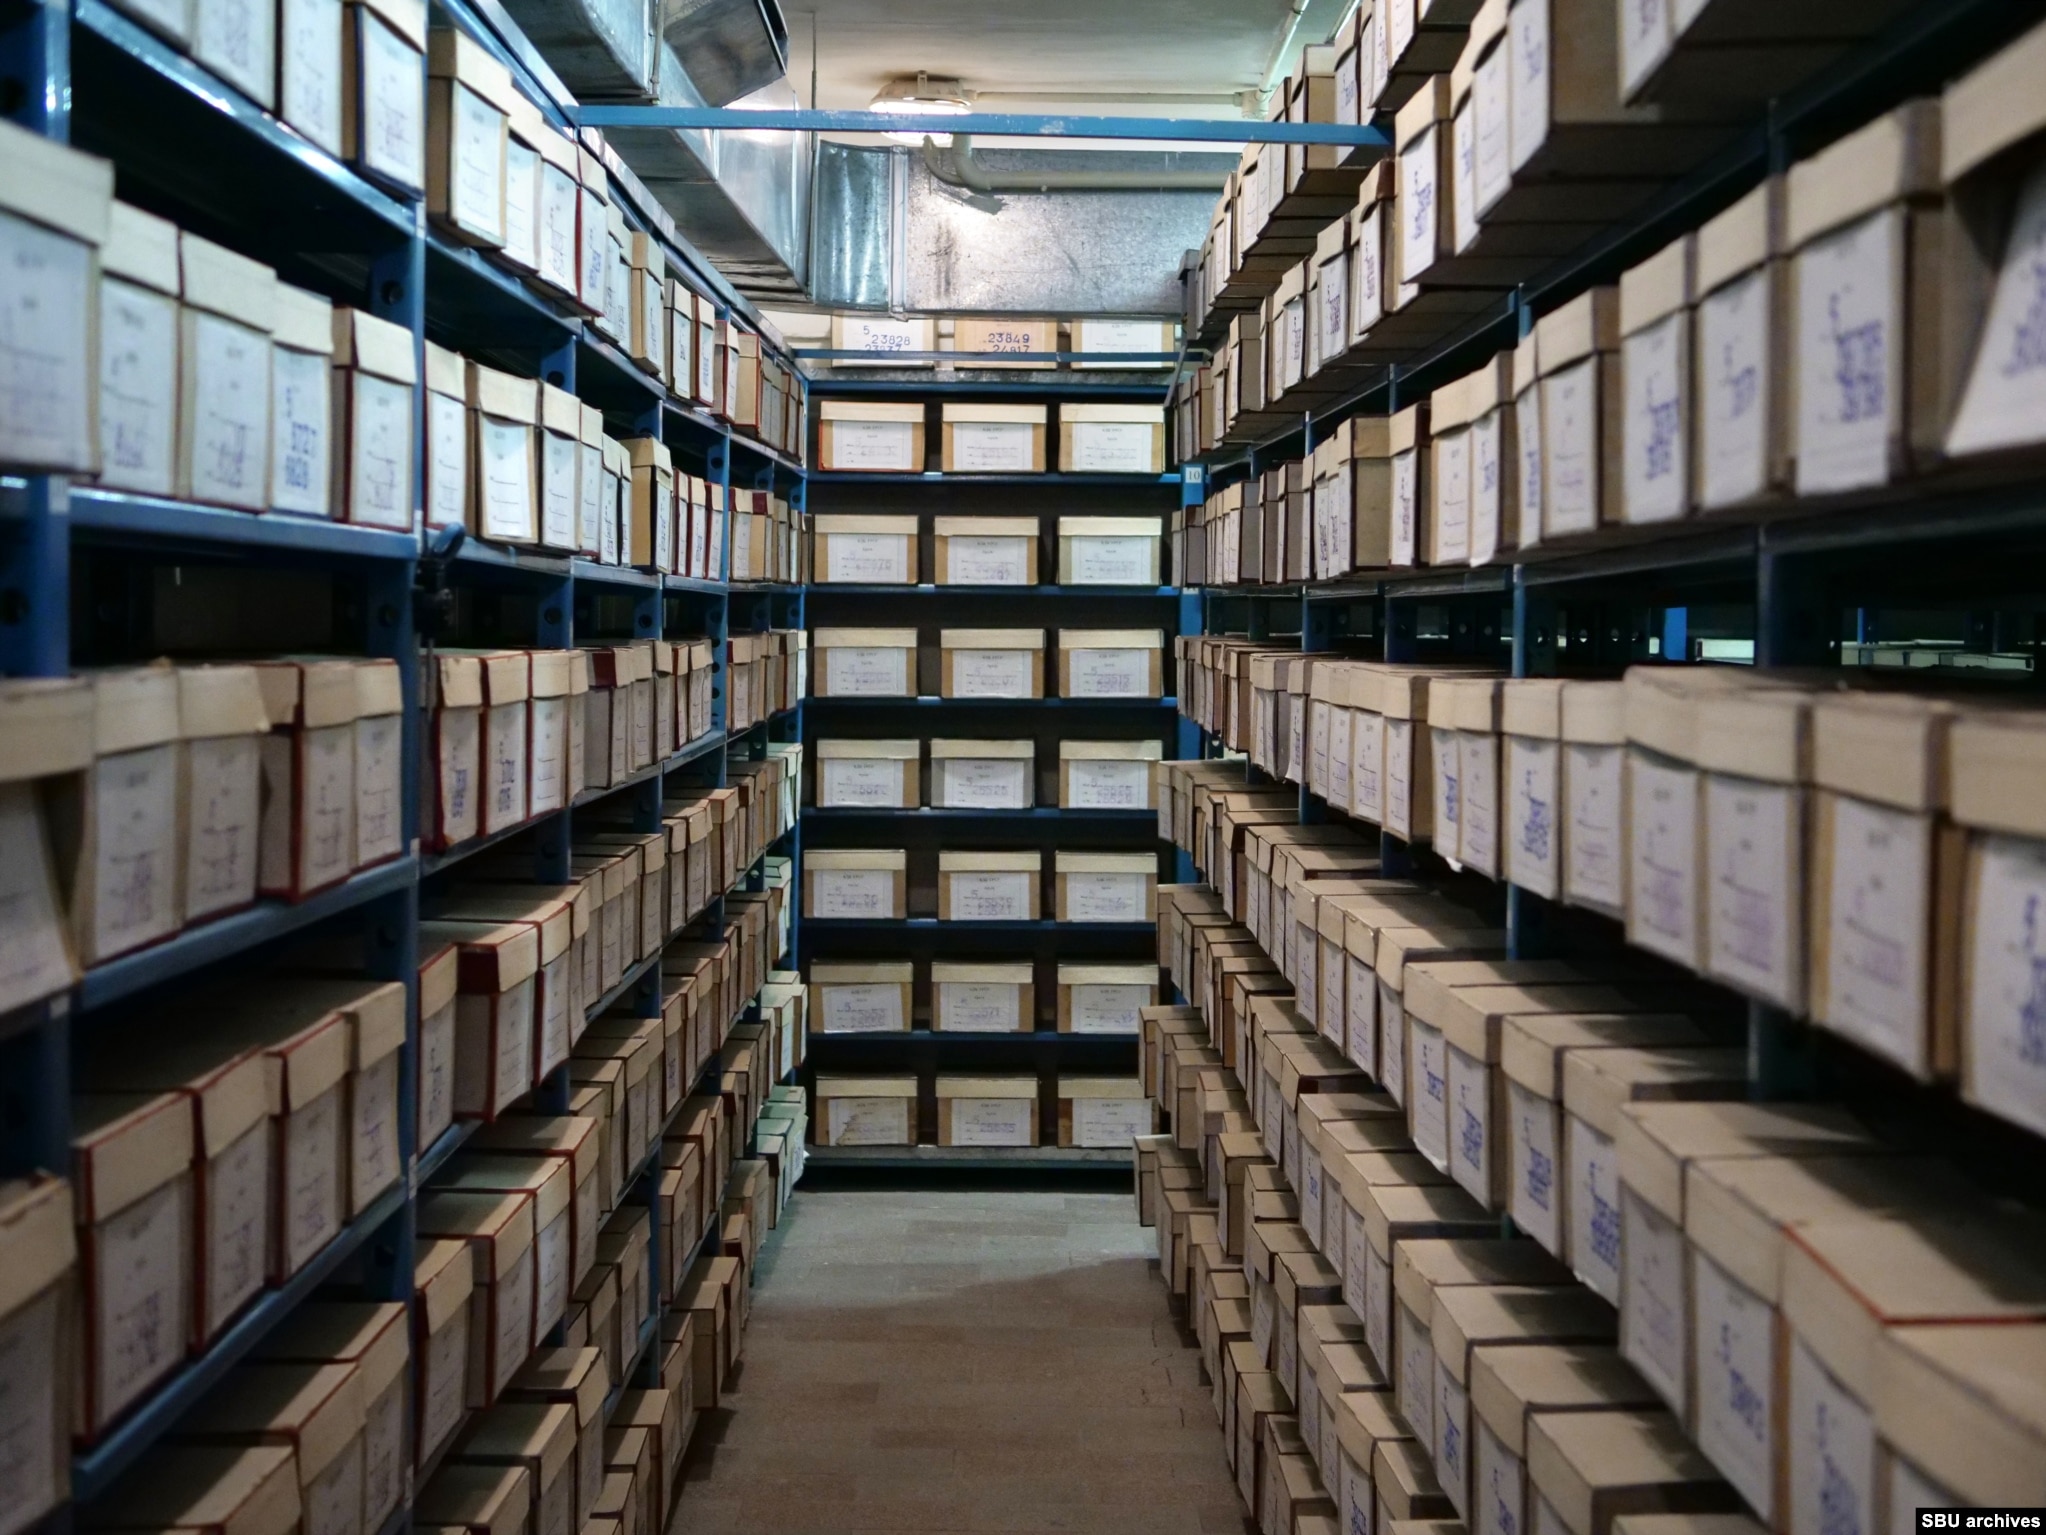 The SBU (Security Service Of Ukraine) archive in Kyiv, which holds tens of thousands of KGB documents now accessible to the public.